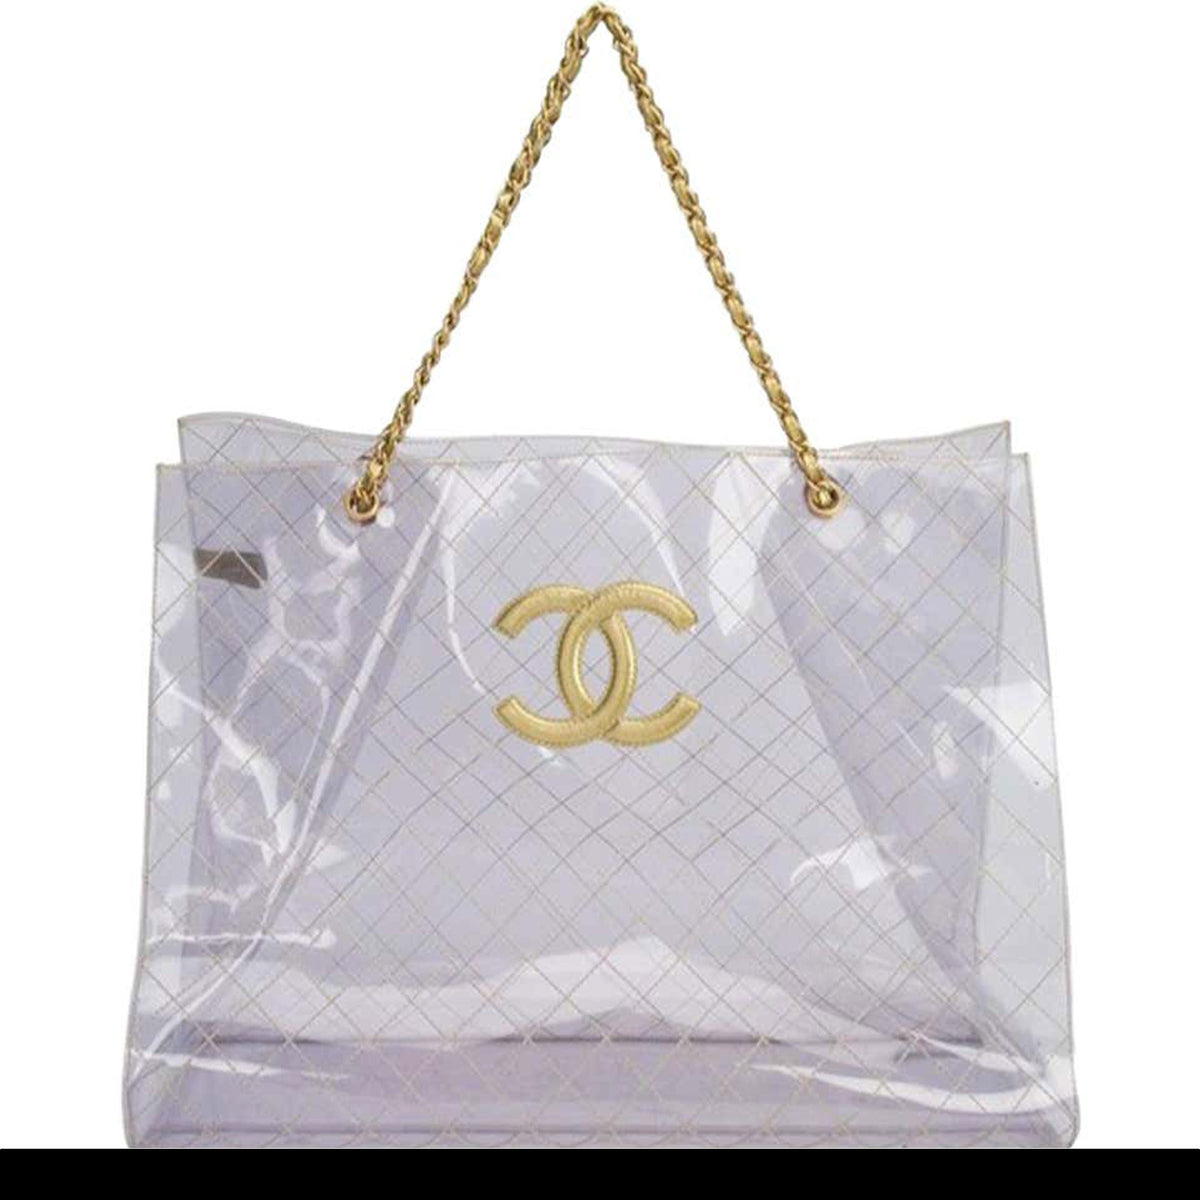 chanel gold tote bag large